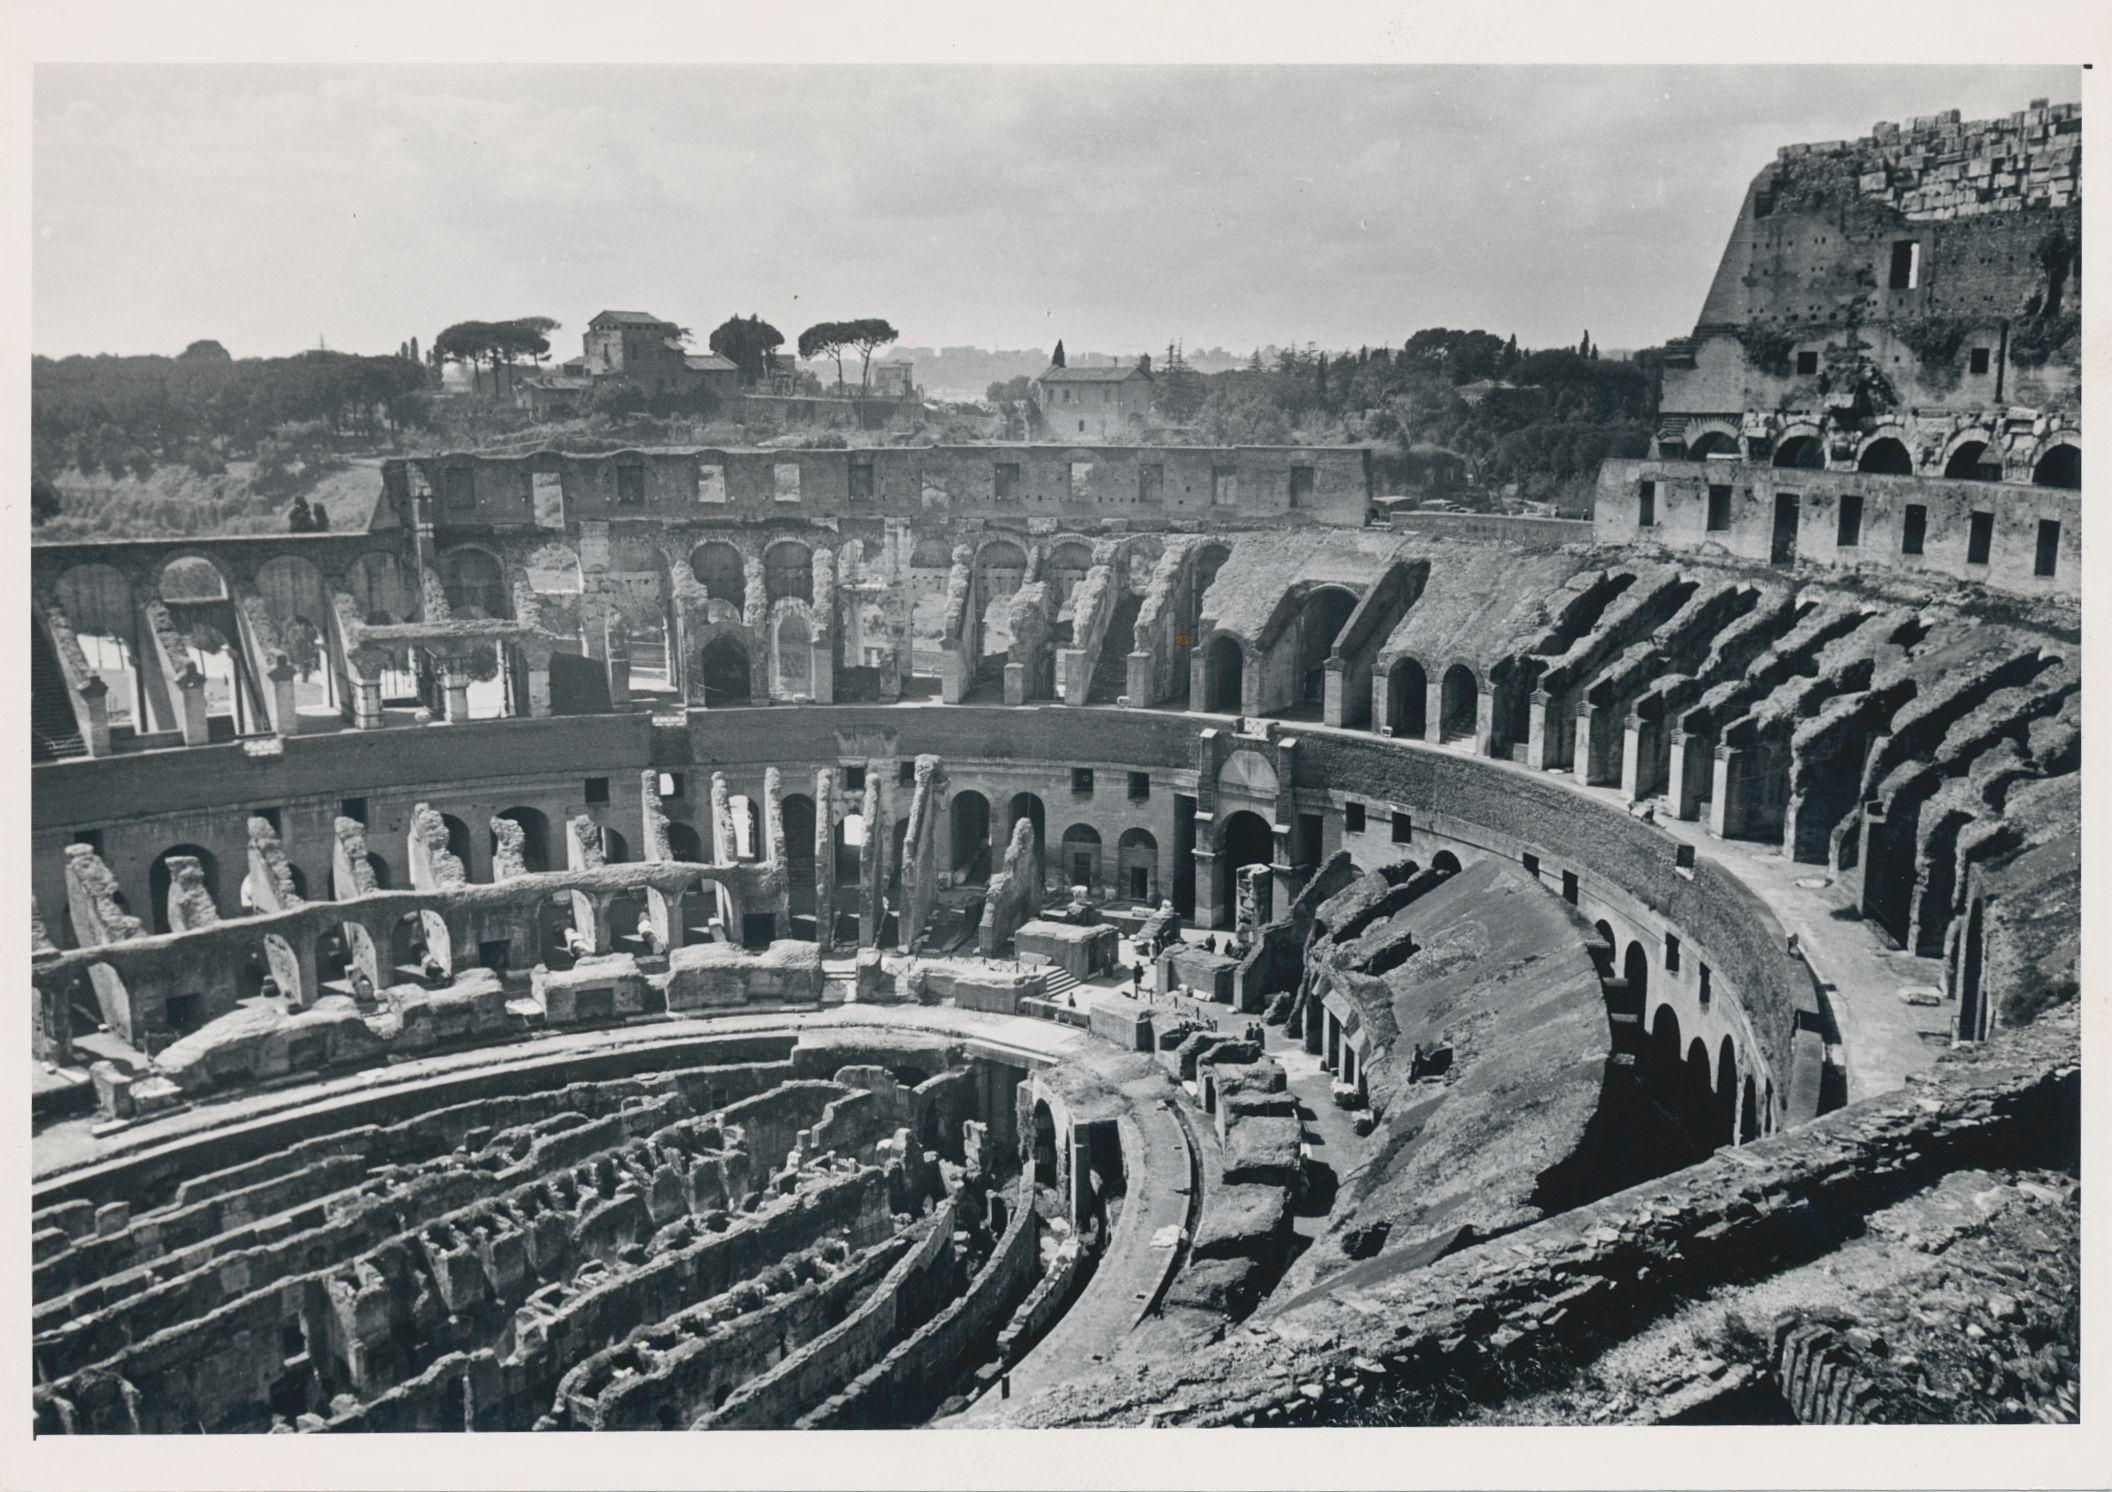 Erich Andres Black and White Photograph - Colloseum, Street Photography, Black and White, Italy 1950s, 12.7 x 18 cm